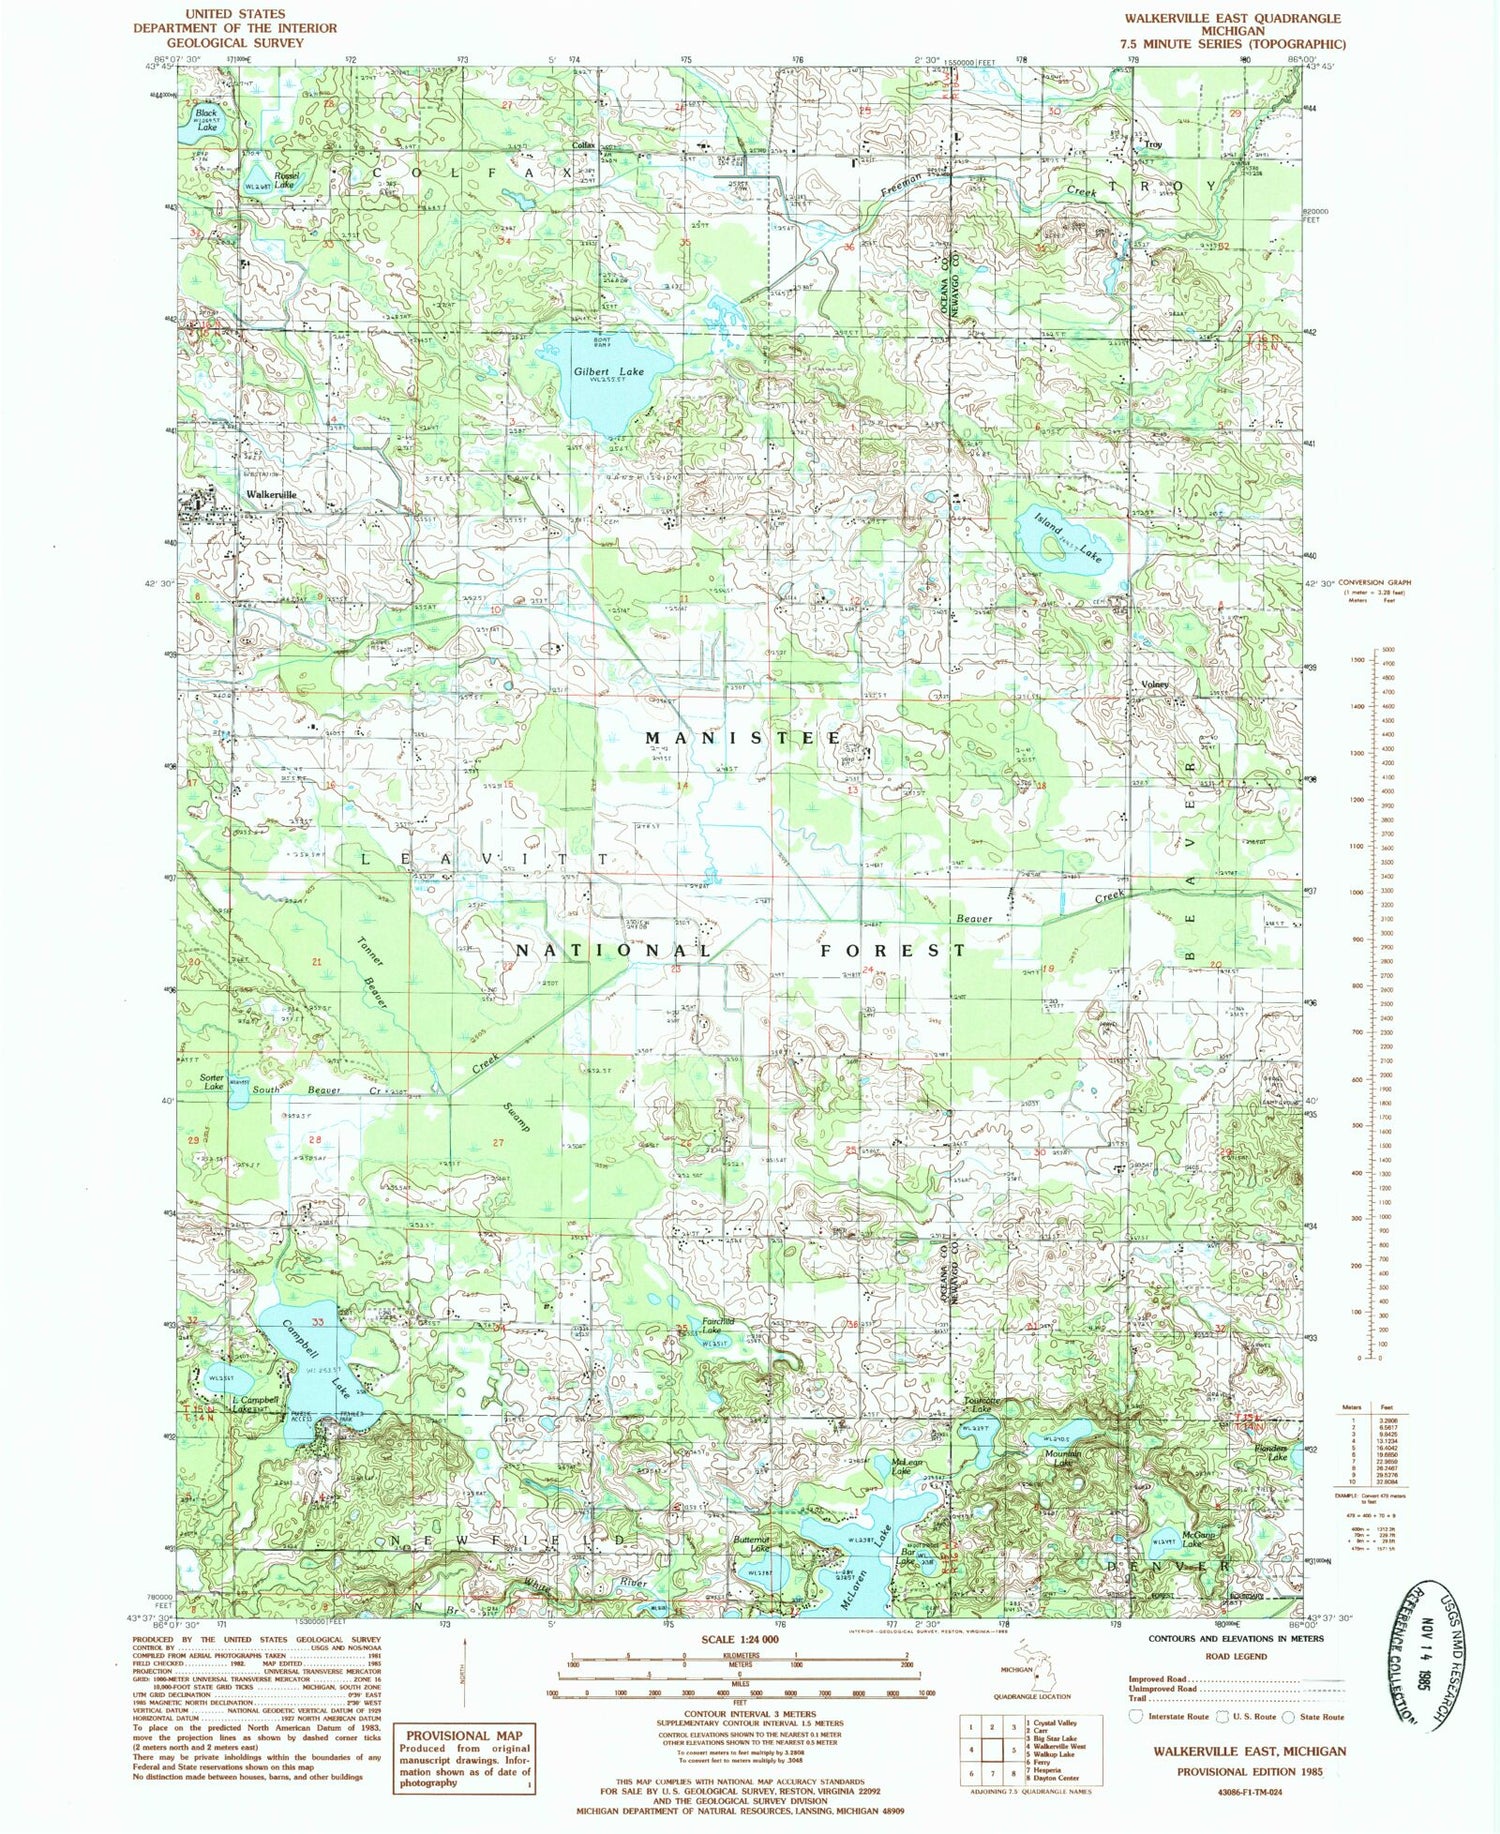 Classic USGS Walkerville East Michigan 7.5'x7.5' Topo Map Image